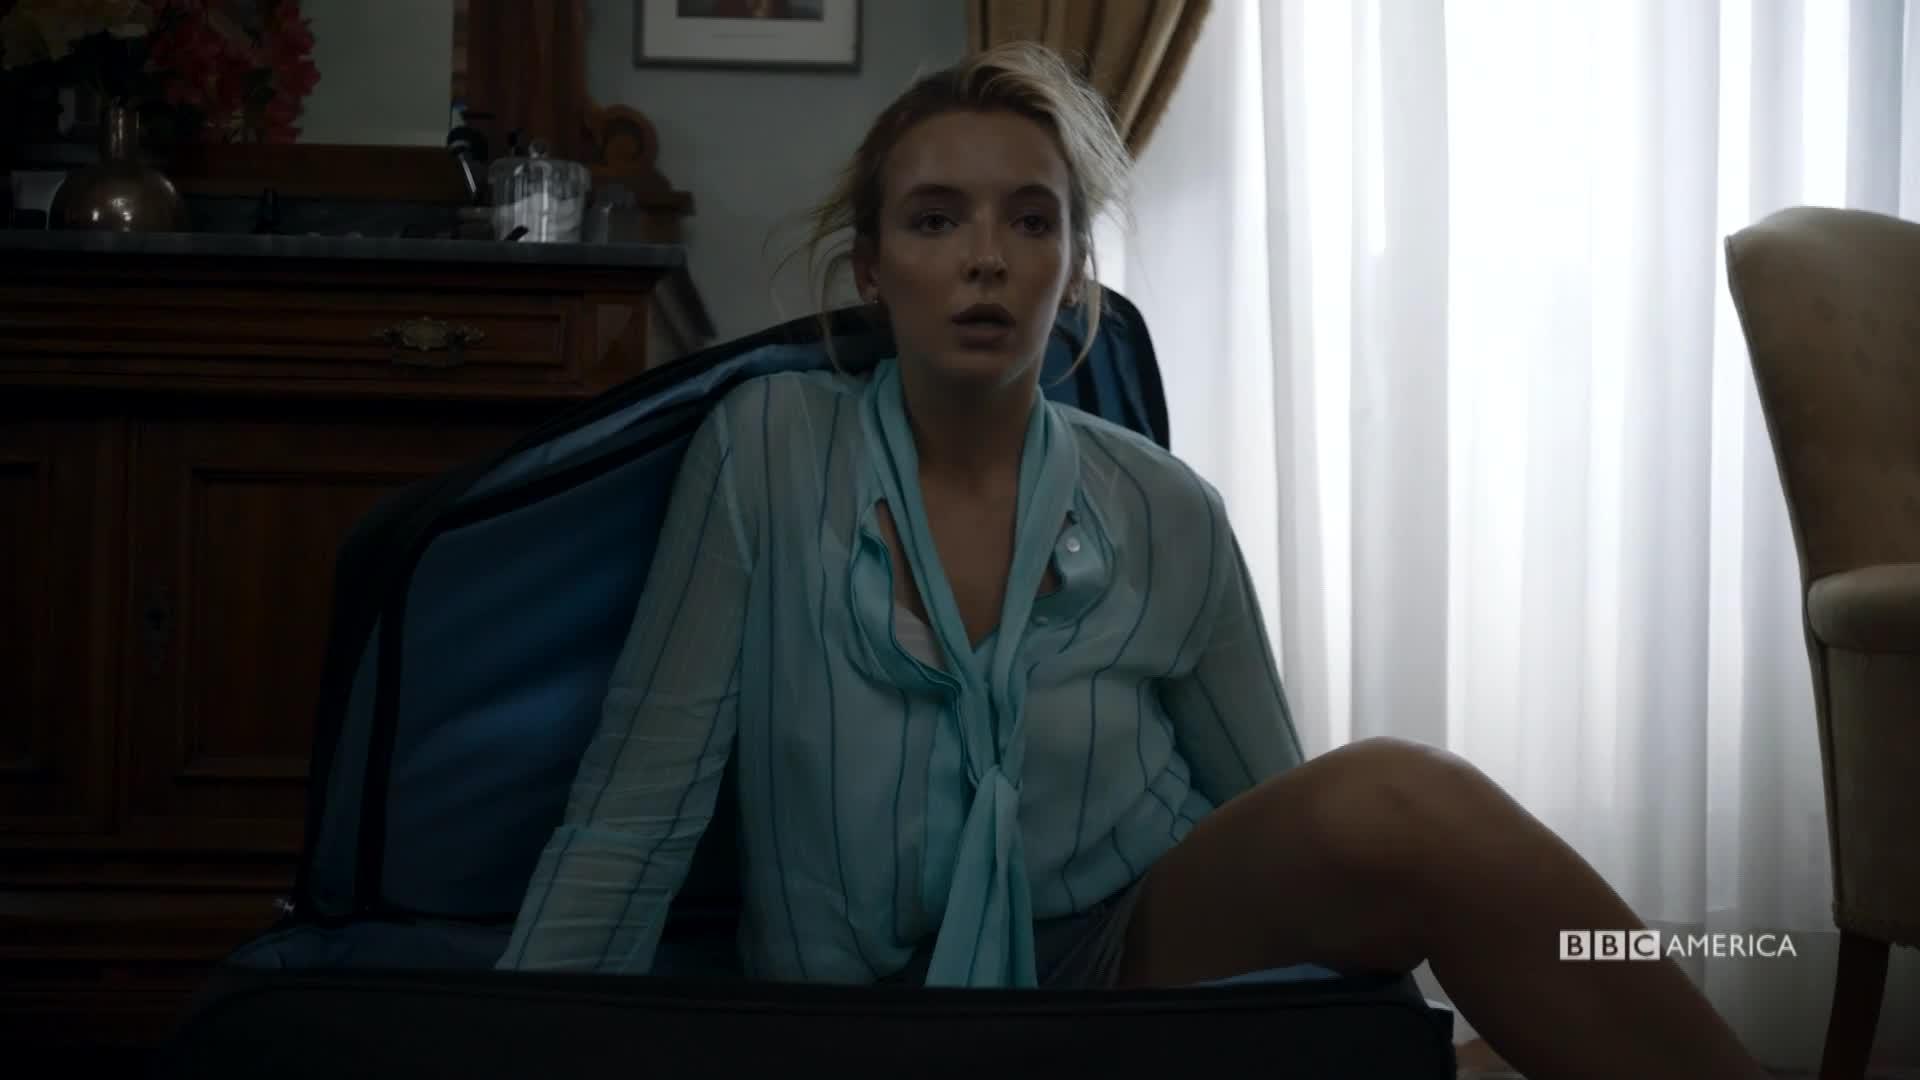 Villanelle's First Kill: Behind the Scenes